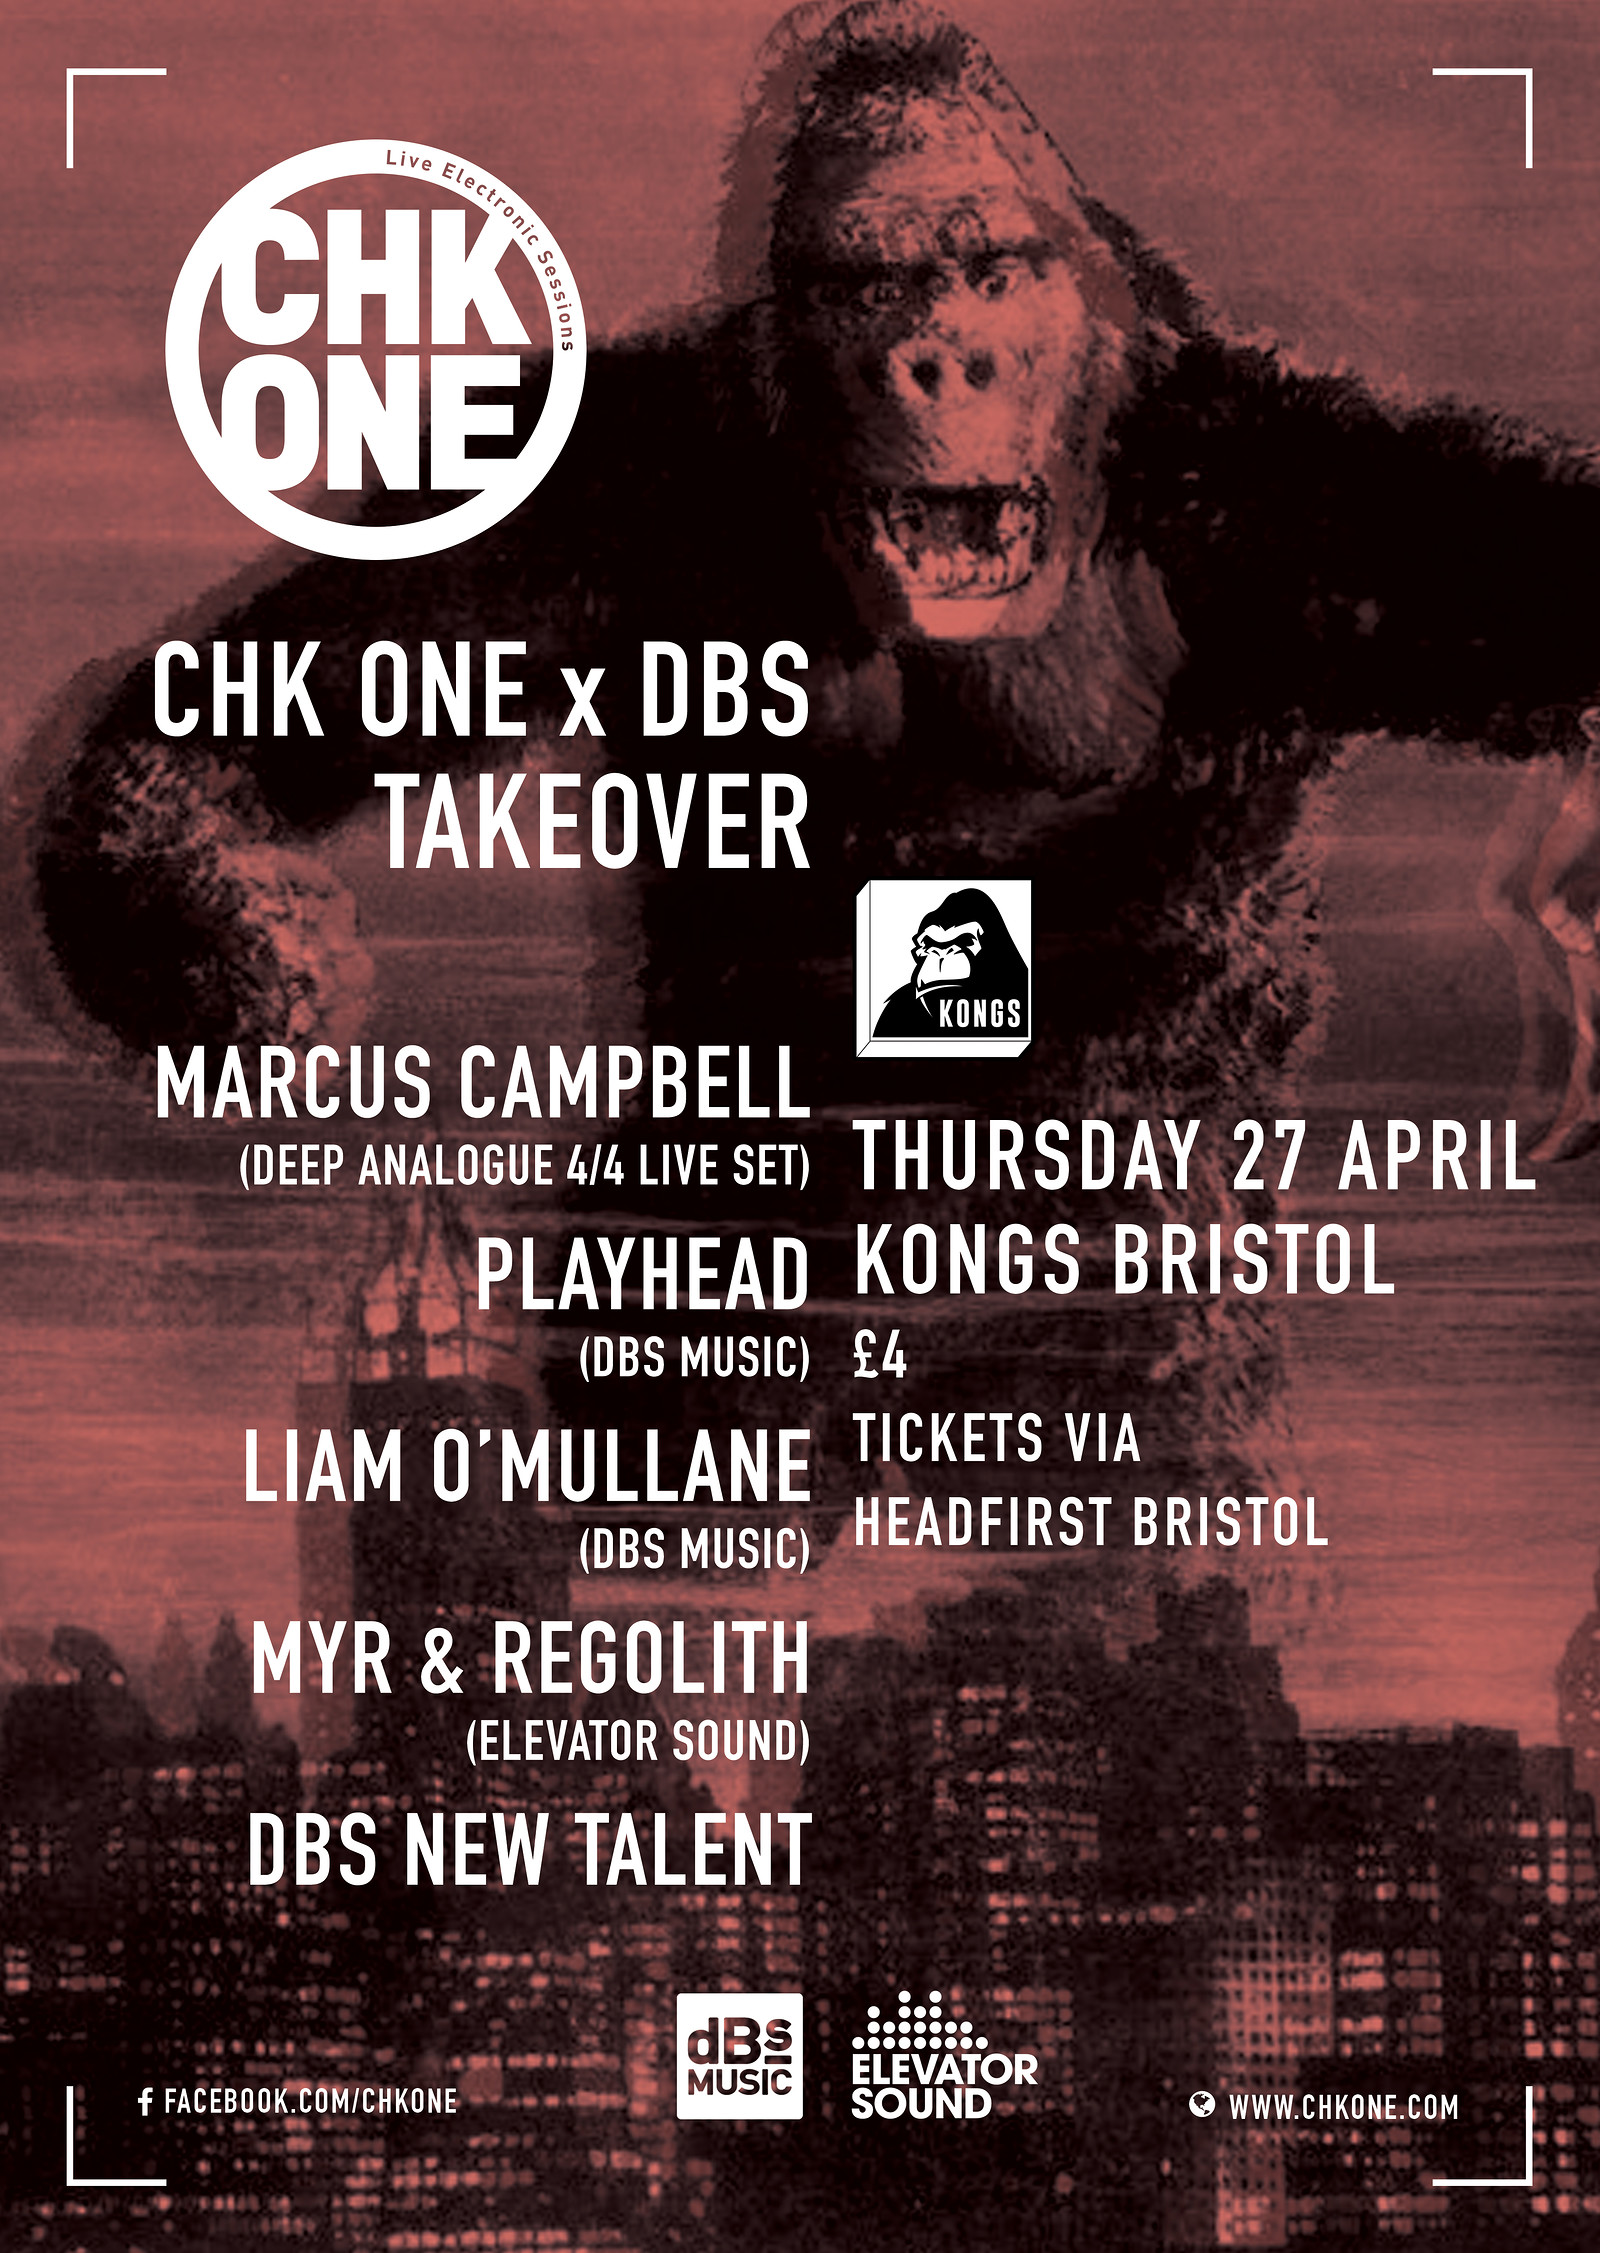 CHK One x DBS takeover at Kongs